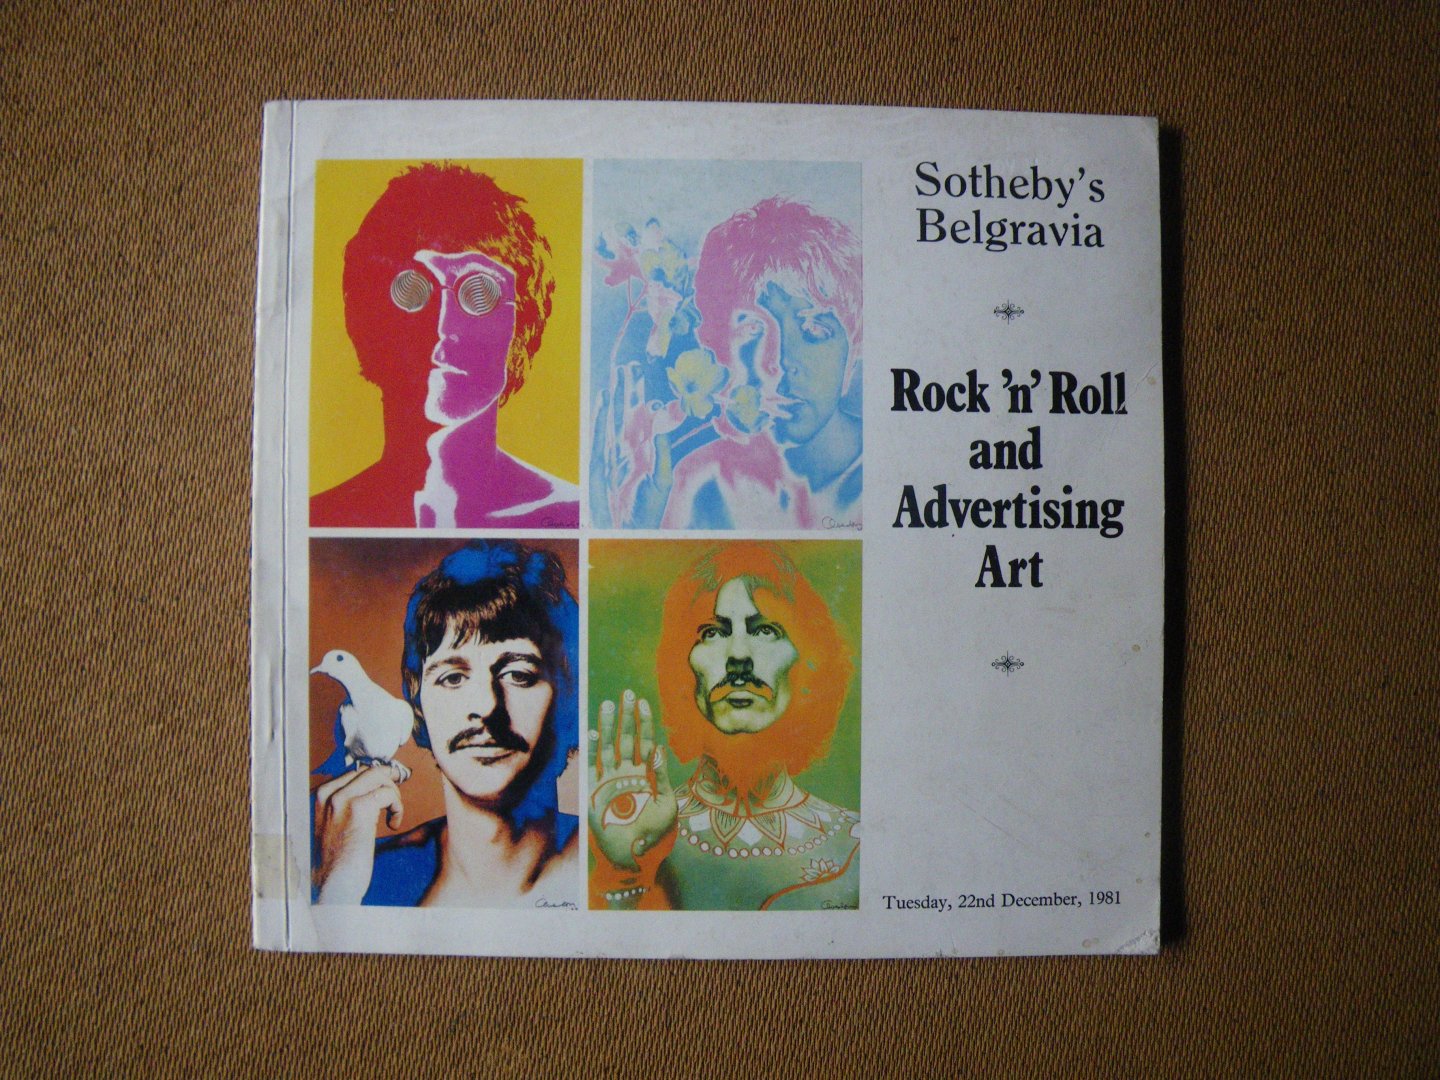 Sotheby's Belgravia - rock 'n' roll and advertising art